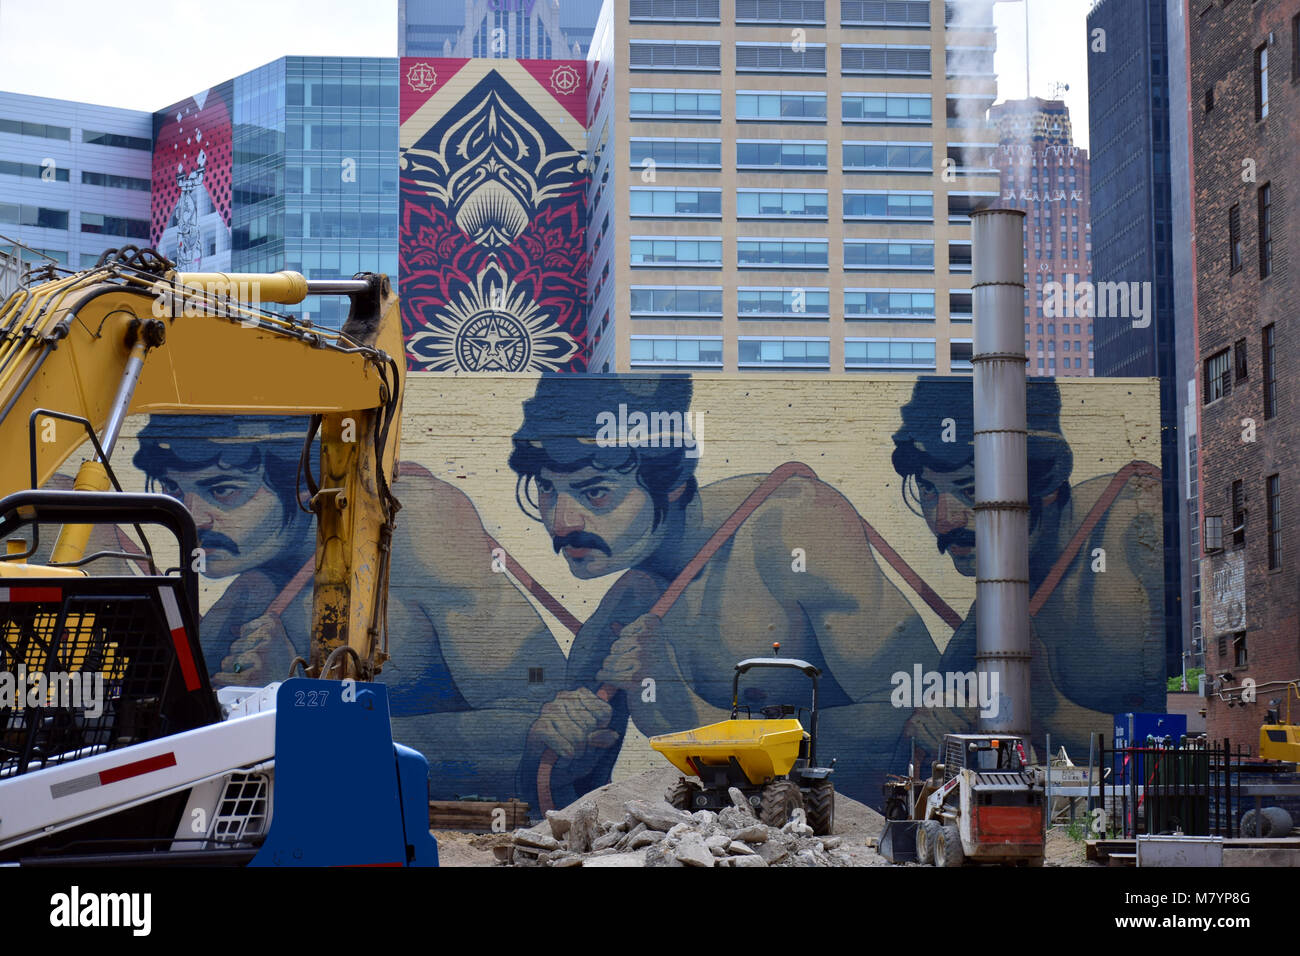 A construction site in downtown Detroit, USA, with office buildings and street art in the background Stock Photo